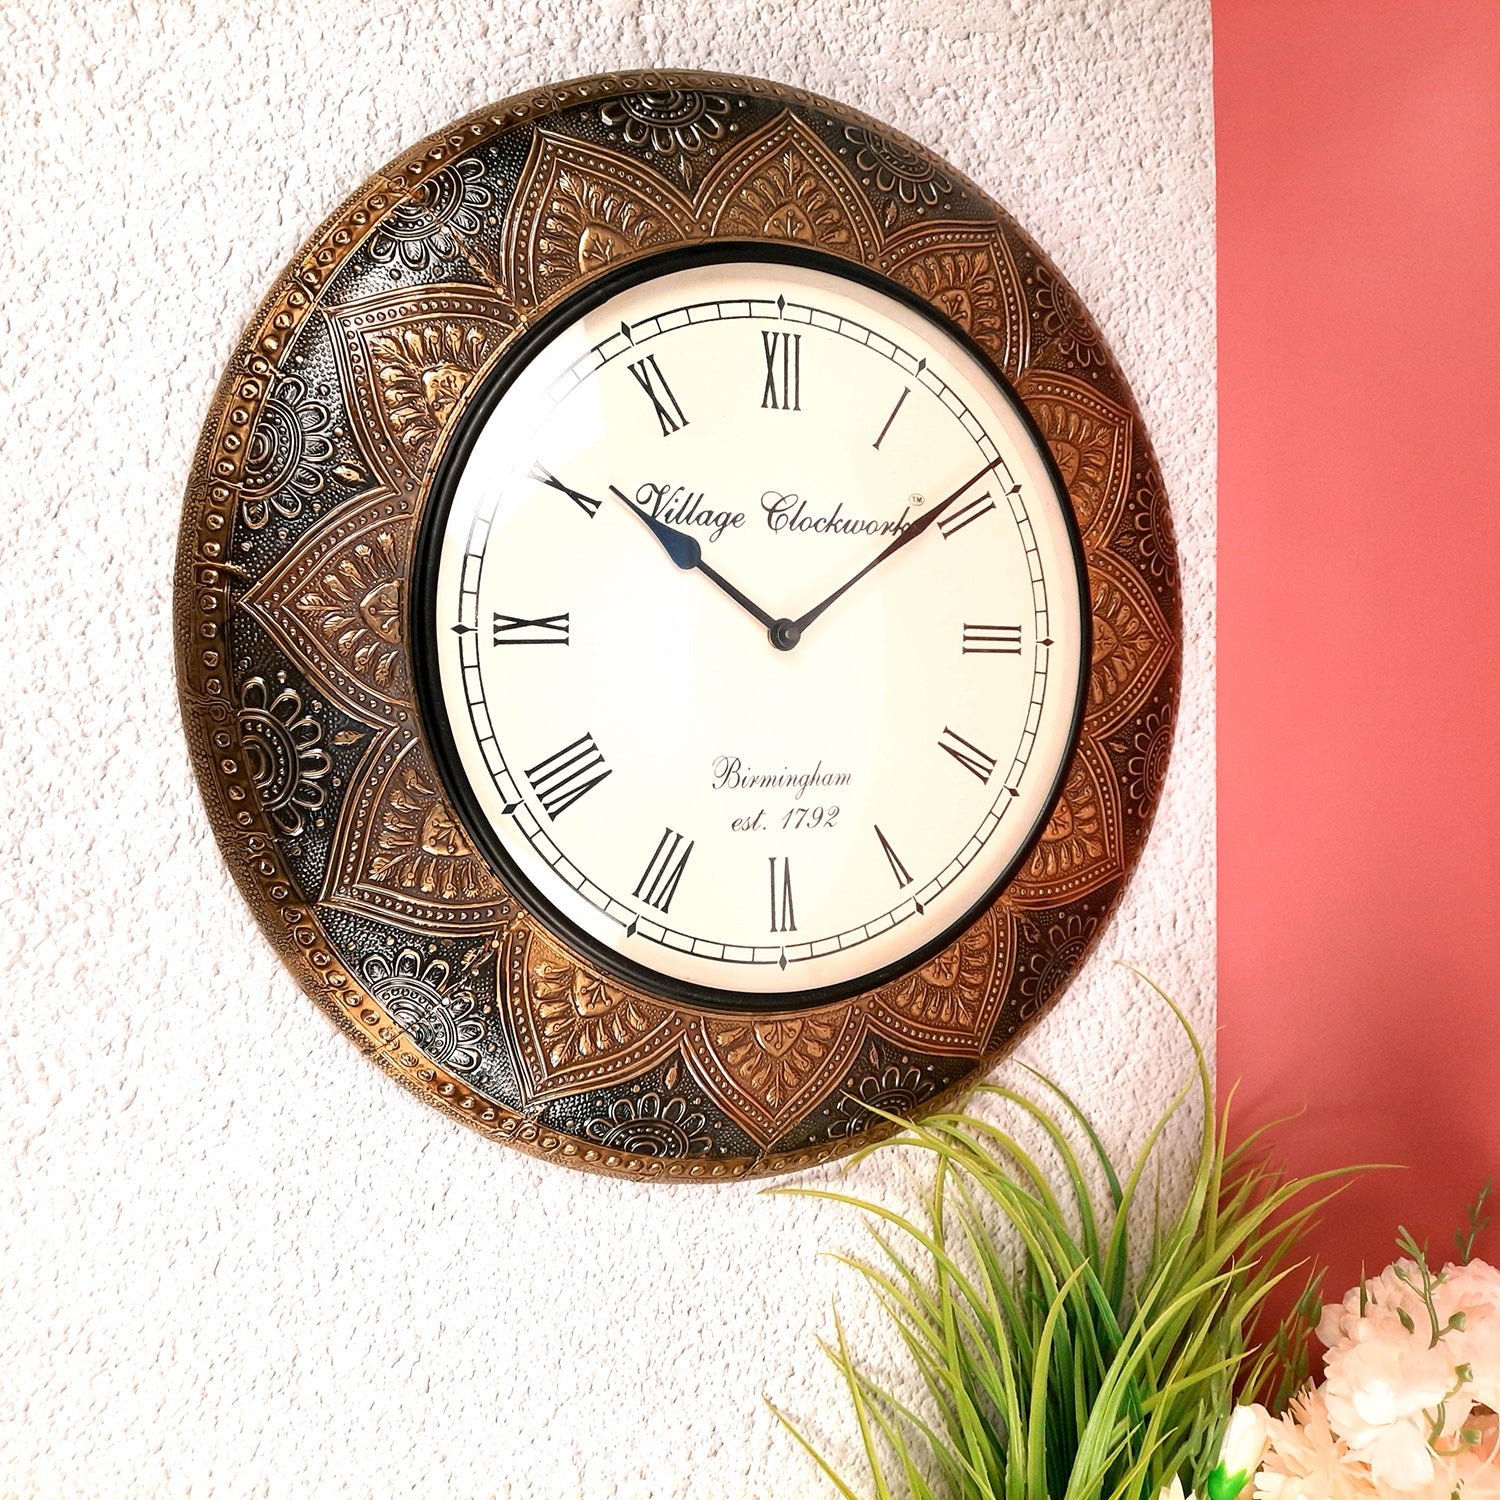 Wall Clock Vintage for Living Room | Wall Mount Clock Antique With Roman Numbers - For Home, Office, Bedroom, Hall Decor & Gifts - 18 inch - Apkamart